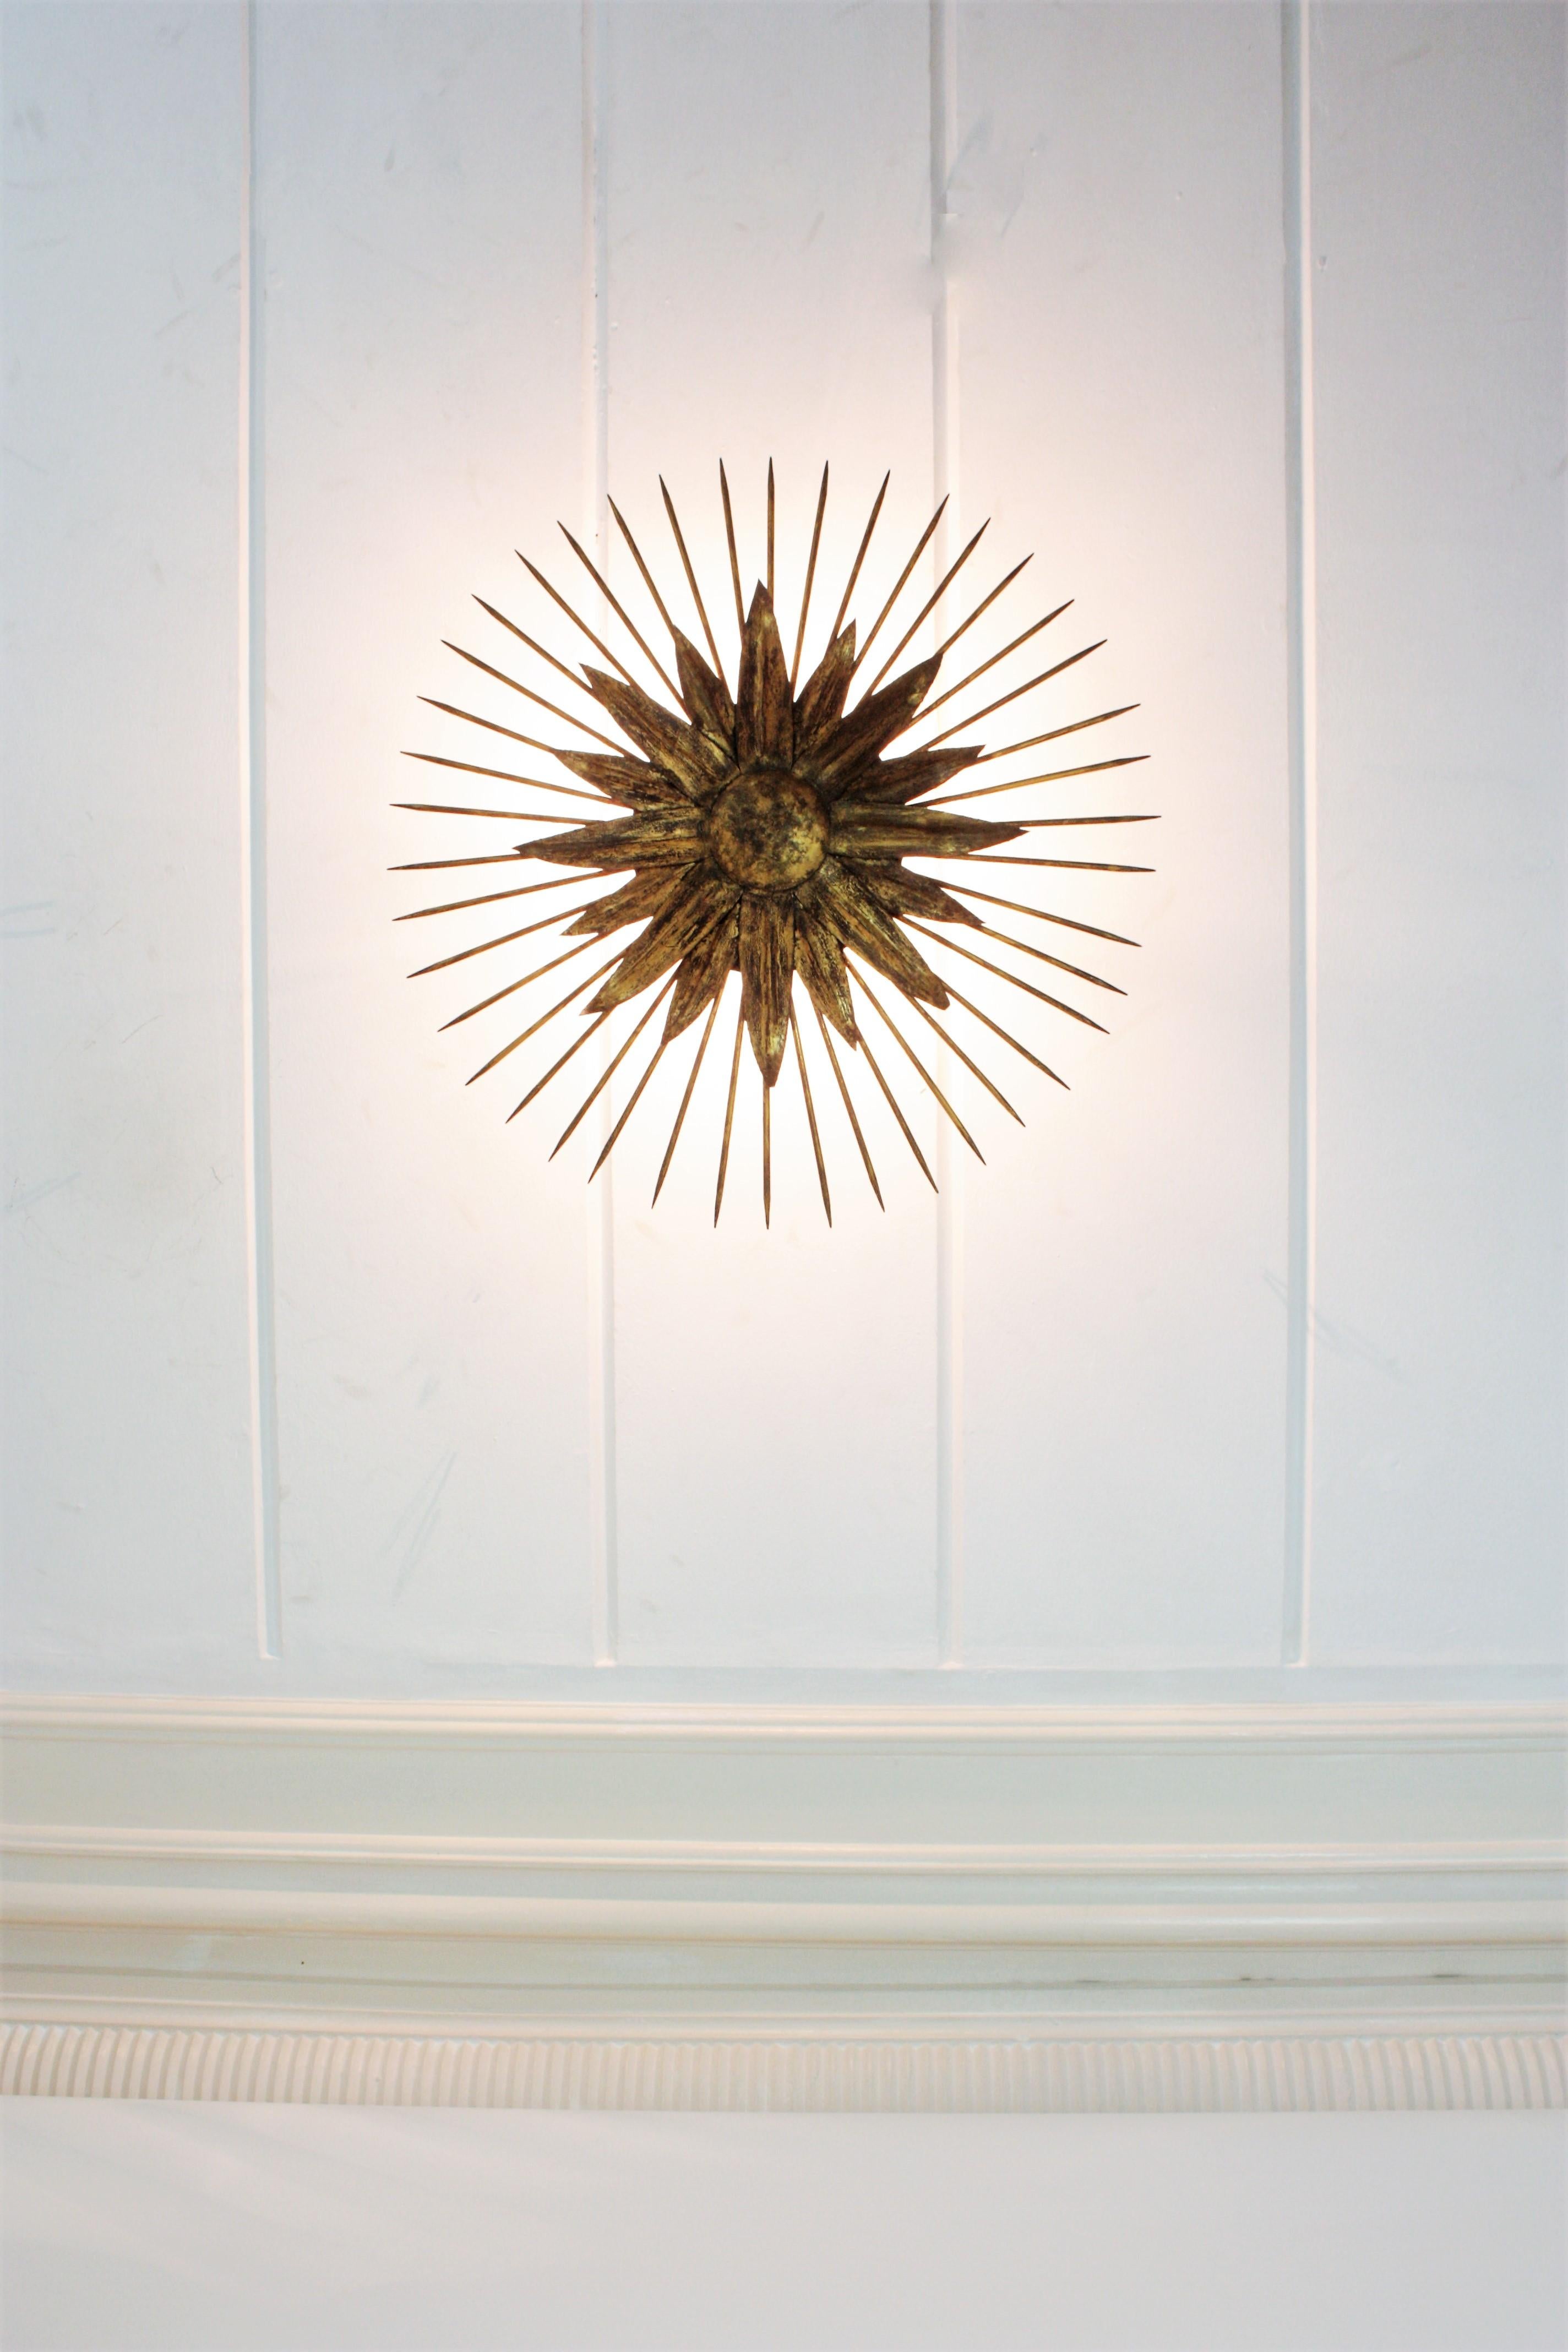 French Sunburst Light Fixture in Gilt Iron with Nail Detail, 1940s For Sale 2